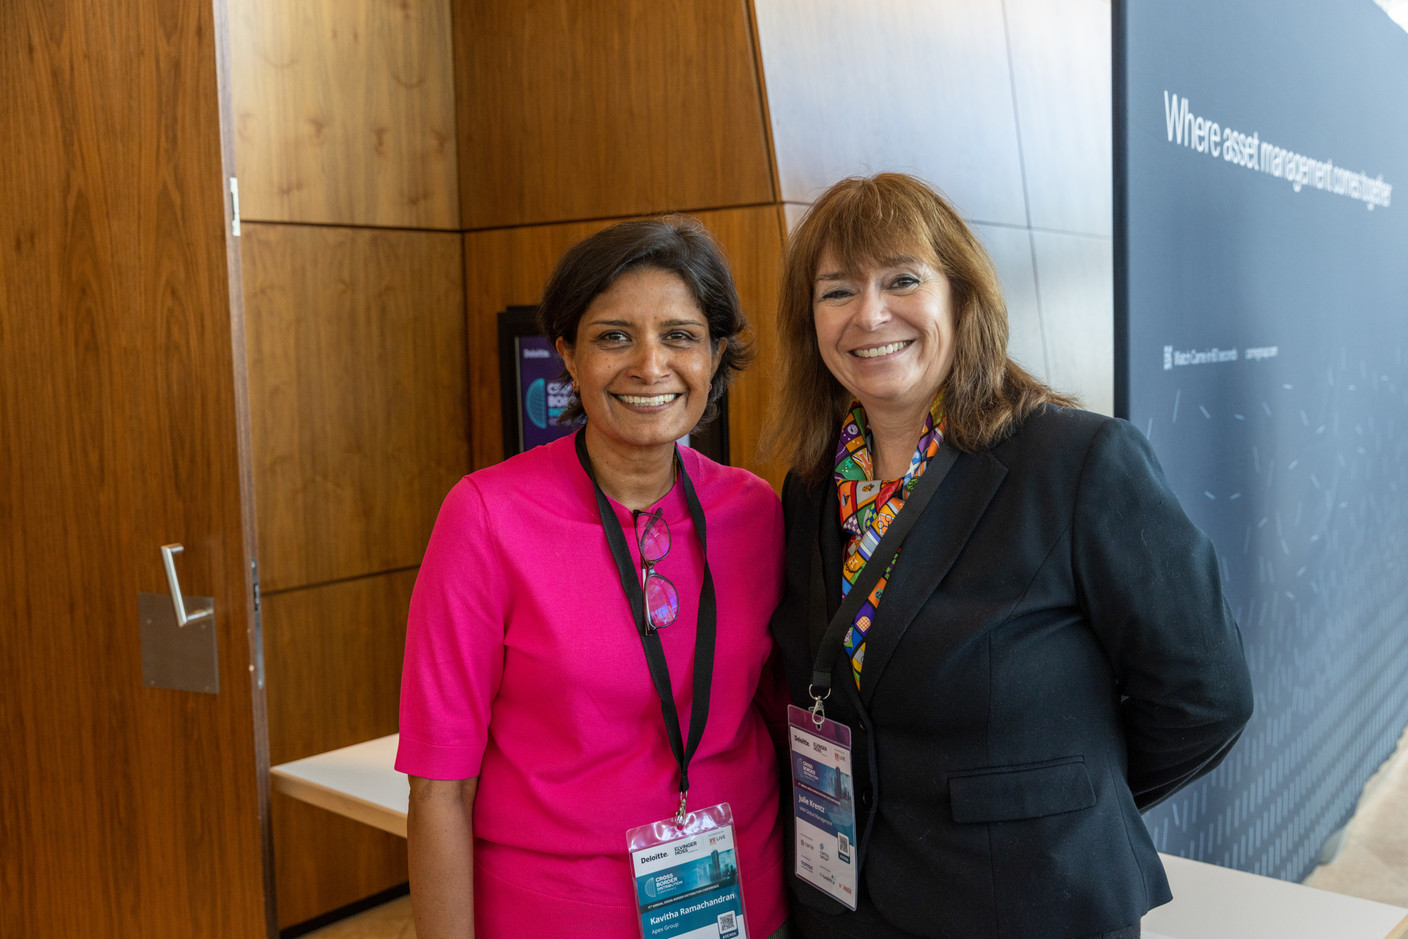 Kavitha Ramachandran (Apex Group) and Julie Krentz (VAM Global Management) at the Cross-Border Distribution Conference held at the European Convention Center in Kirchberg on 25 May. Photo: Romain Gamba/Maison Moderne